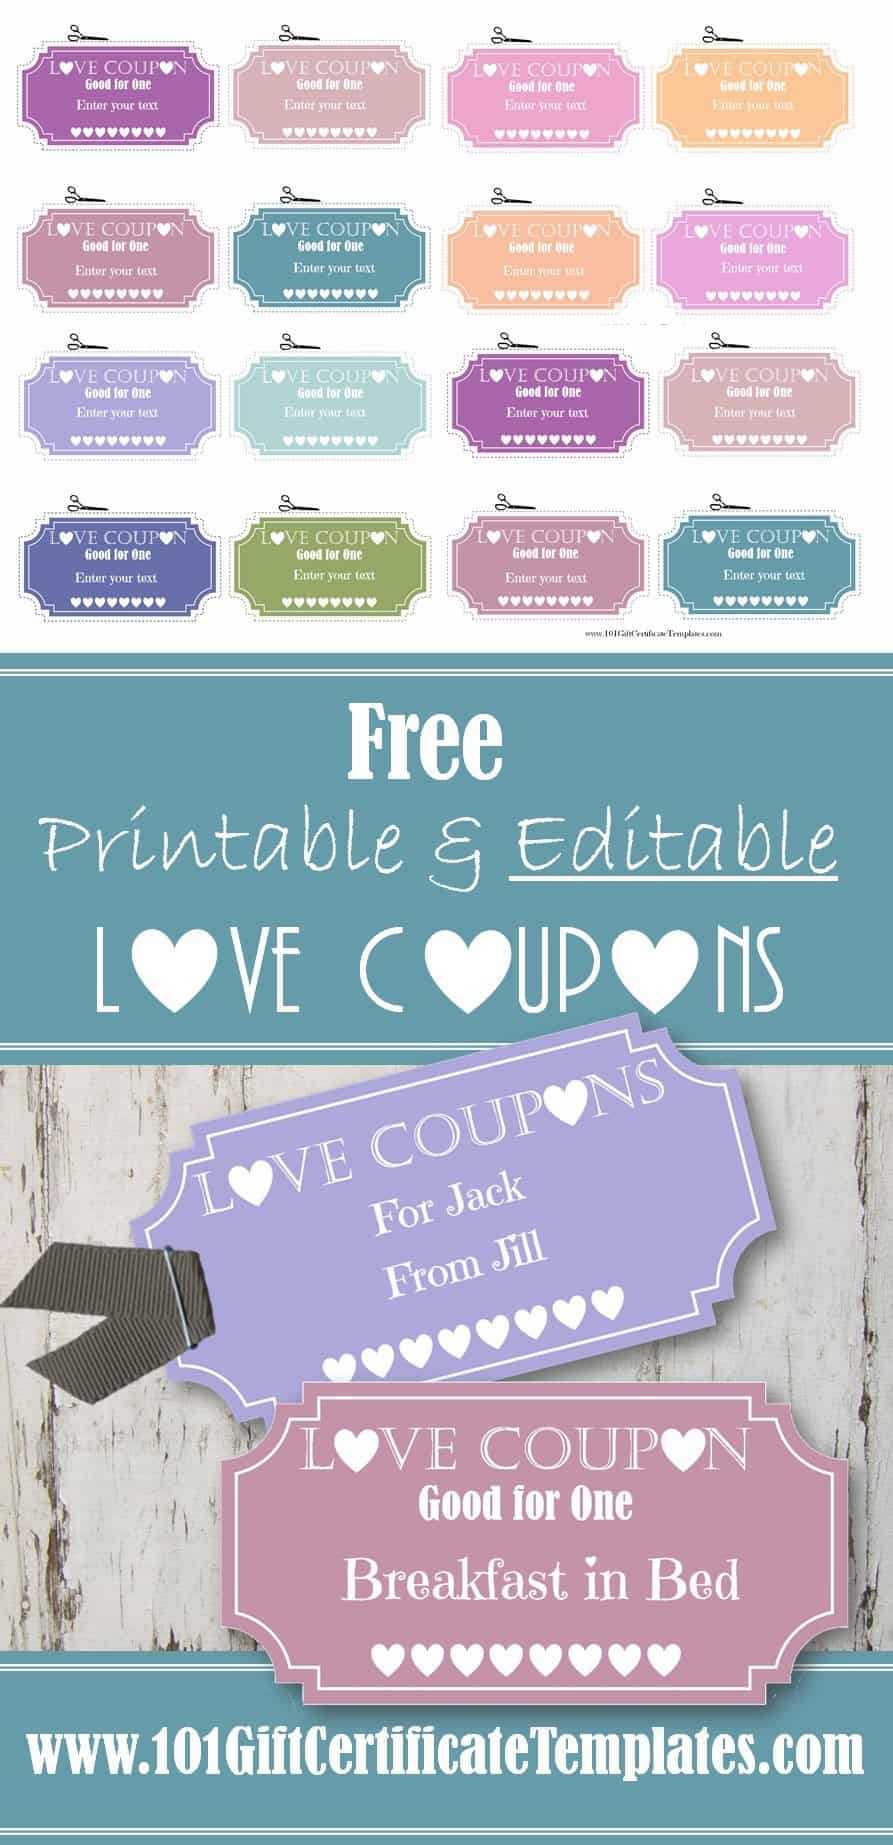 Love Coupons In Blank Coupon Template Printable